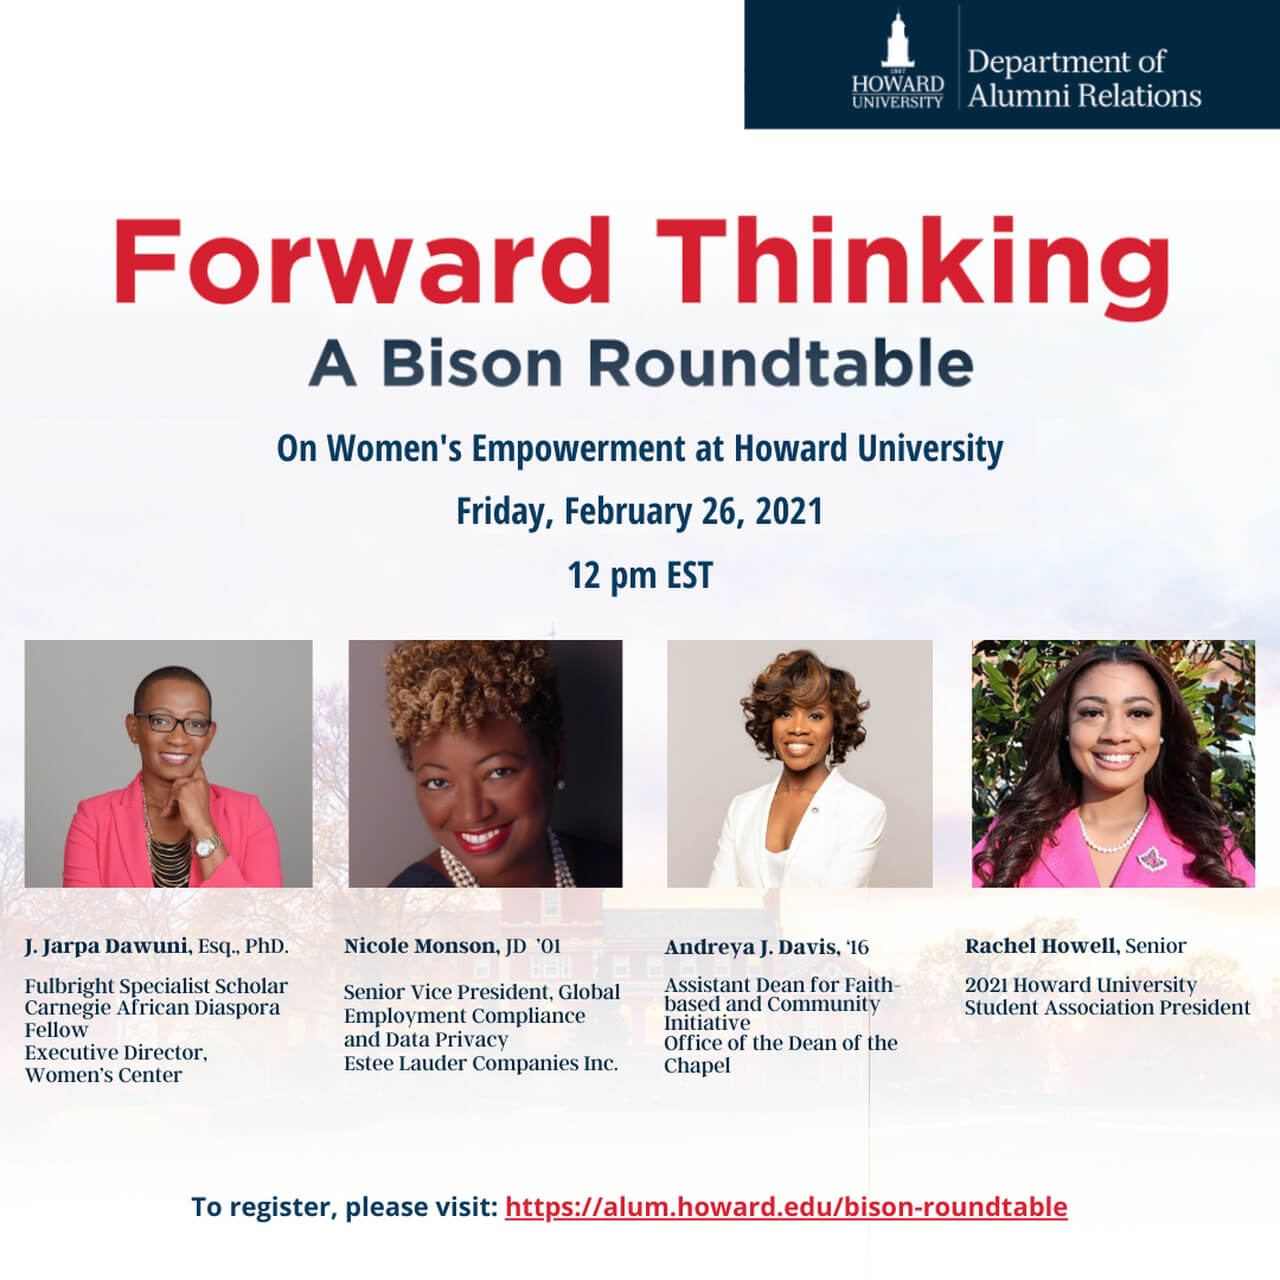 Howard University and The Estée Lauder Companies Partner to Launch She's  Howard: Own Your Power